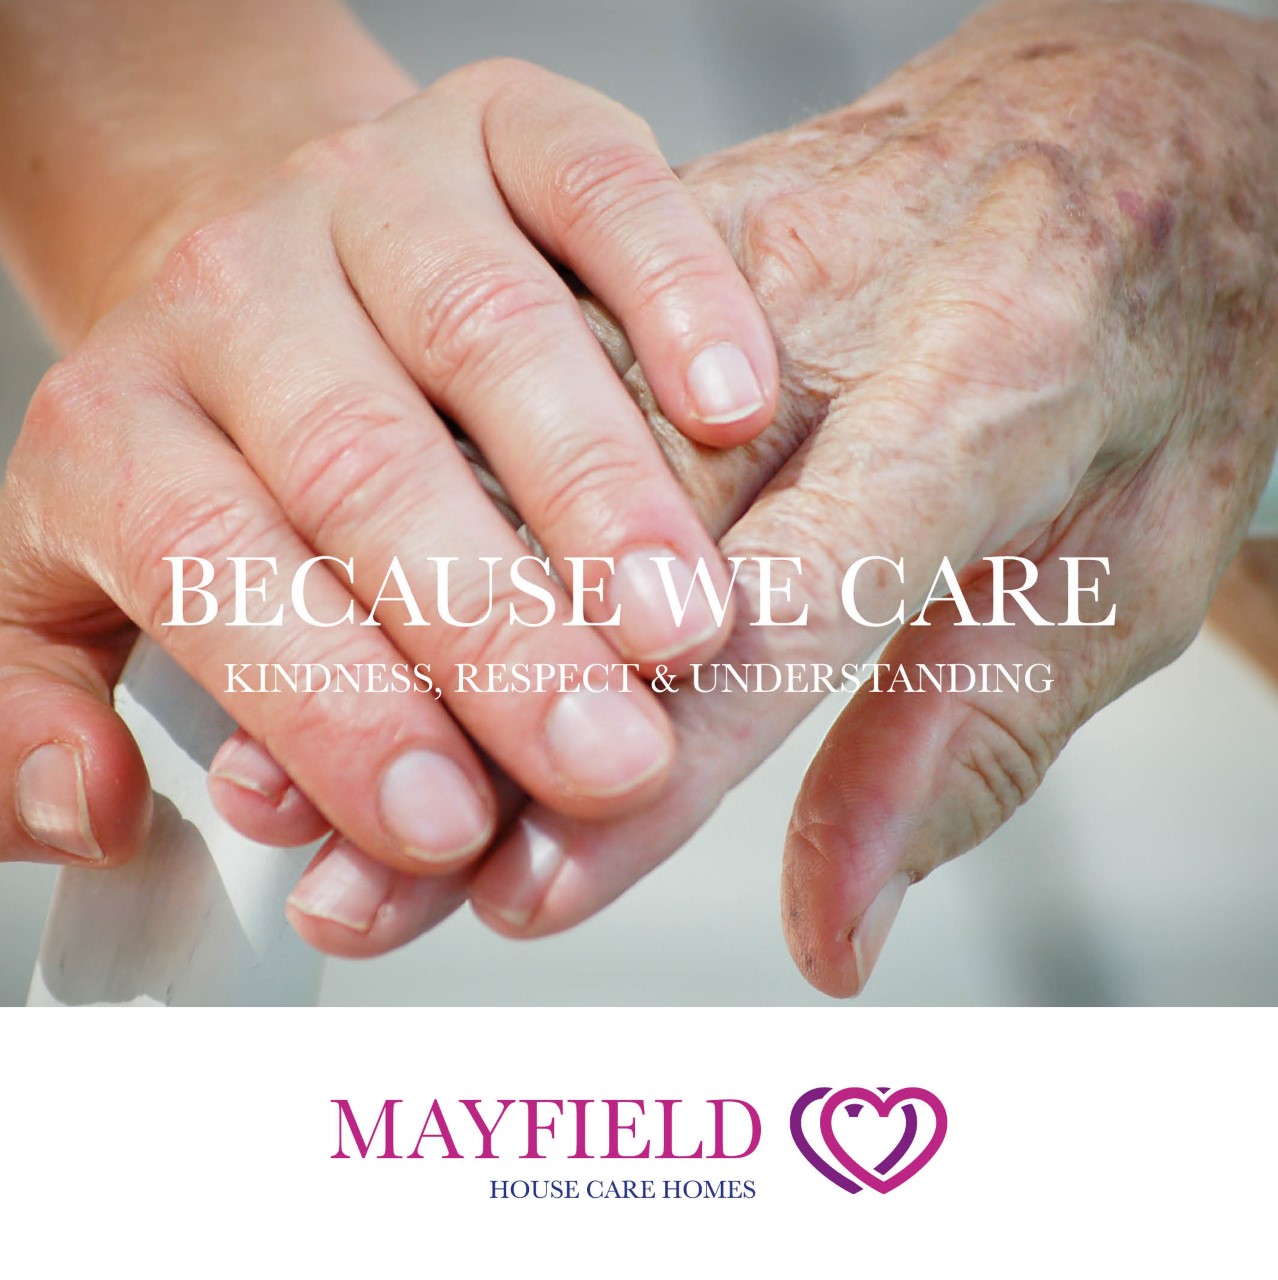 Mayfield Care Home’s: The Care Home that Cares